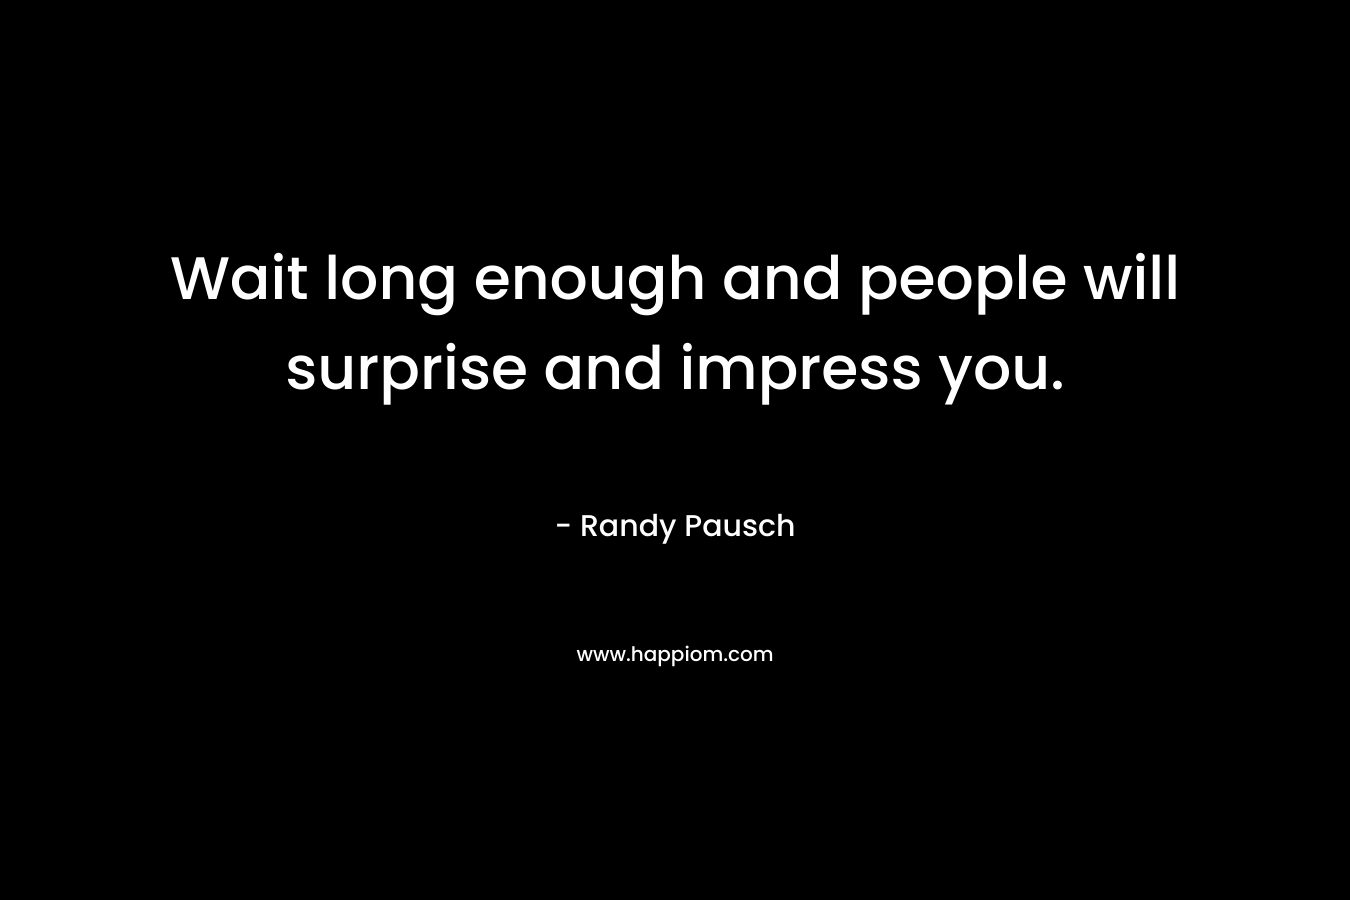 Wait long enough and people will surprise and impress you. – Randy Pausch